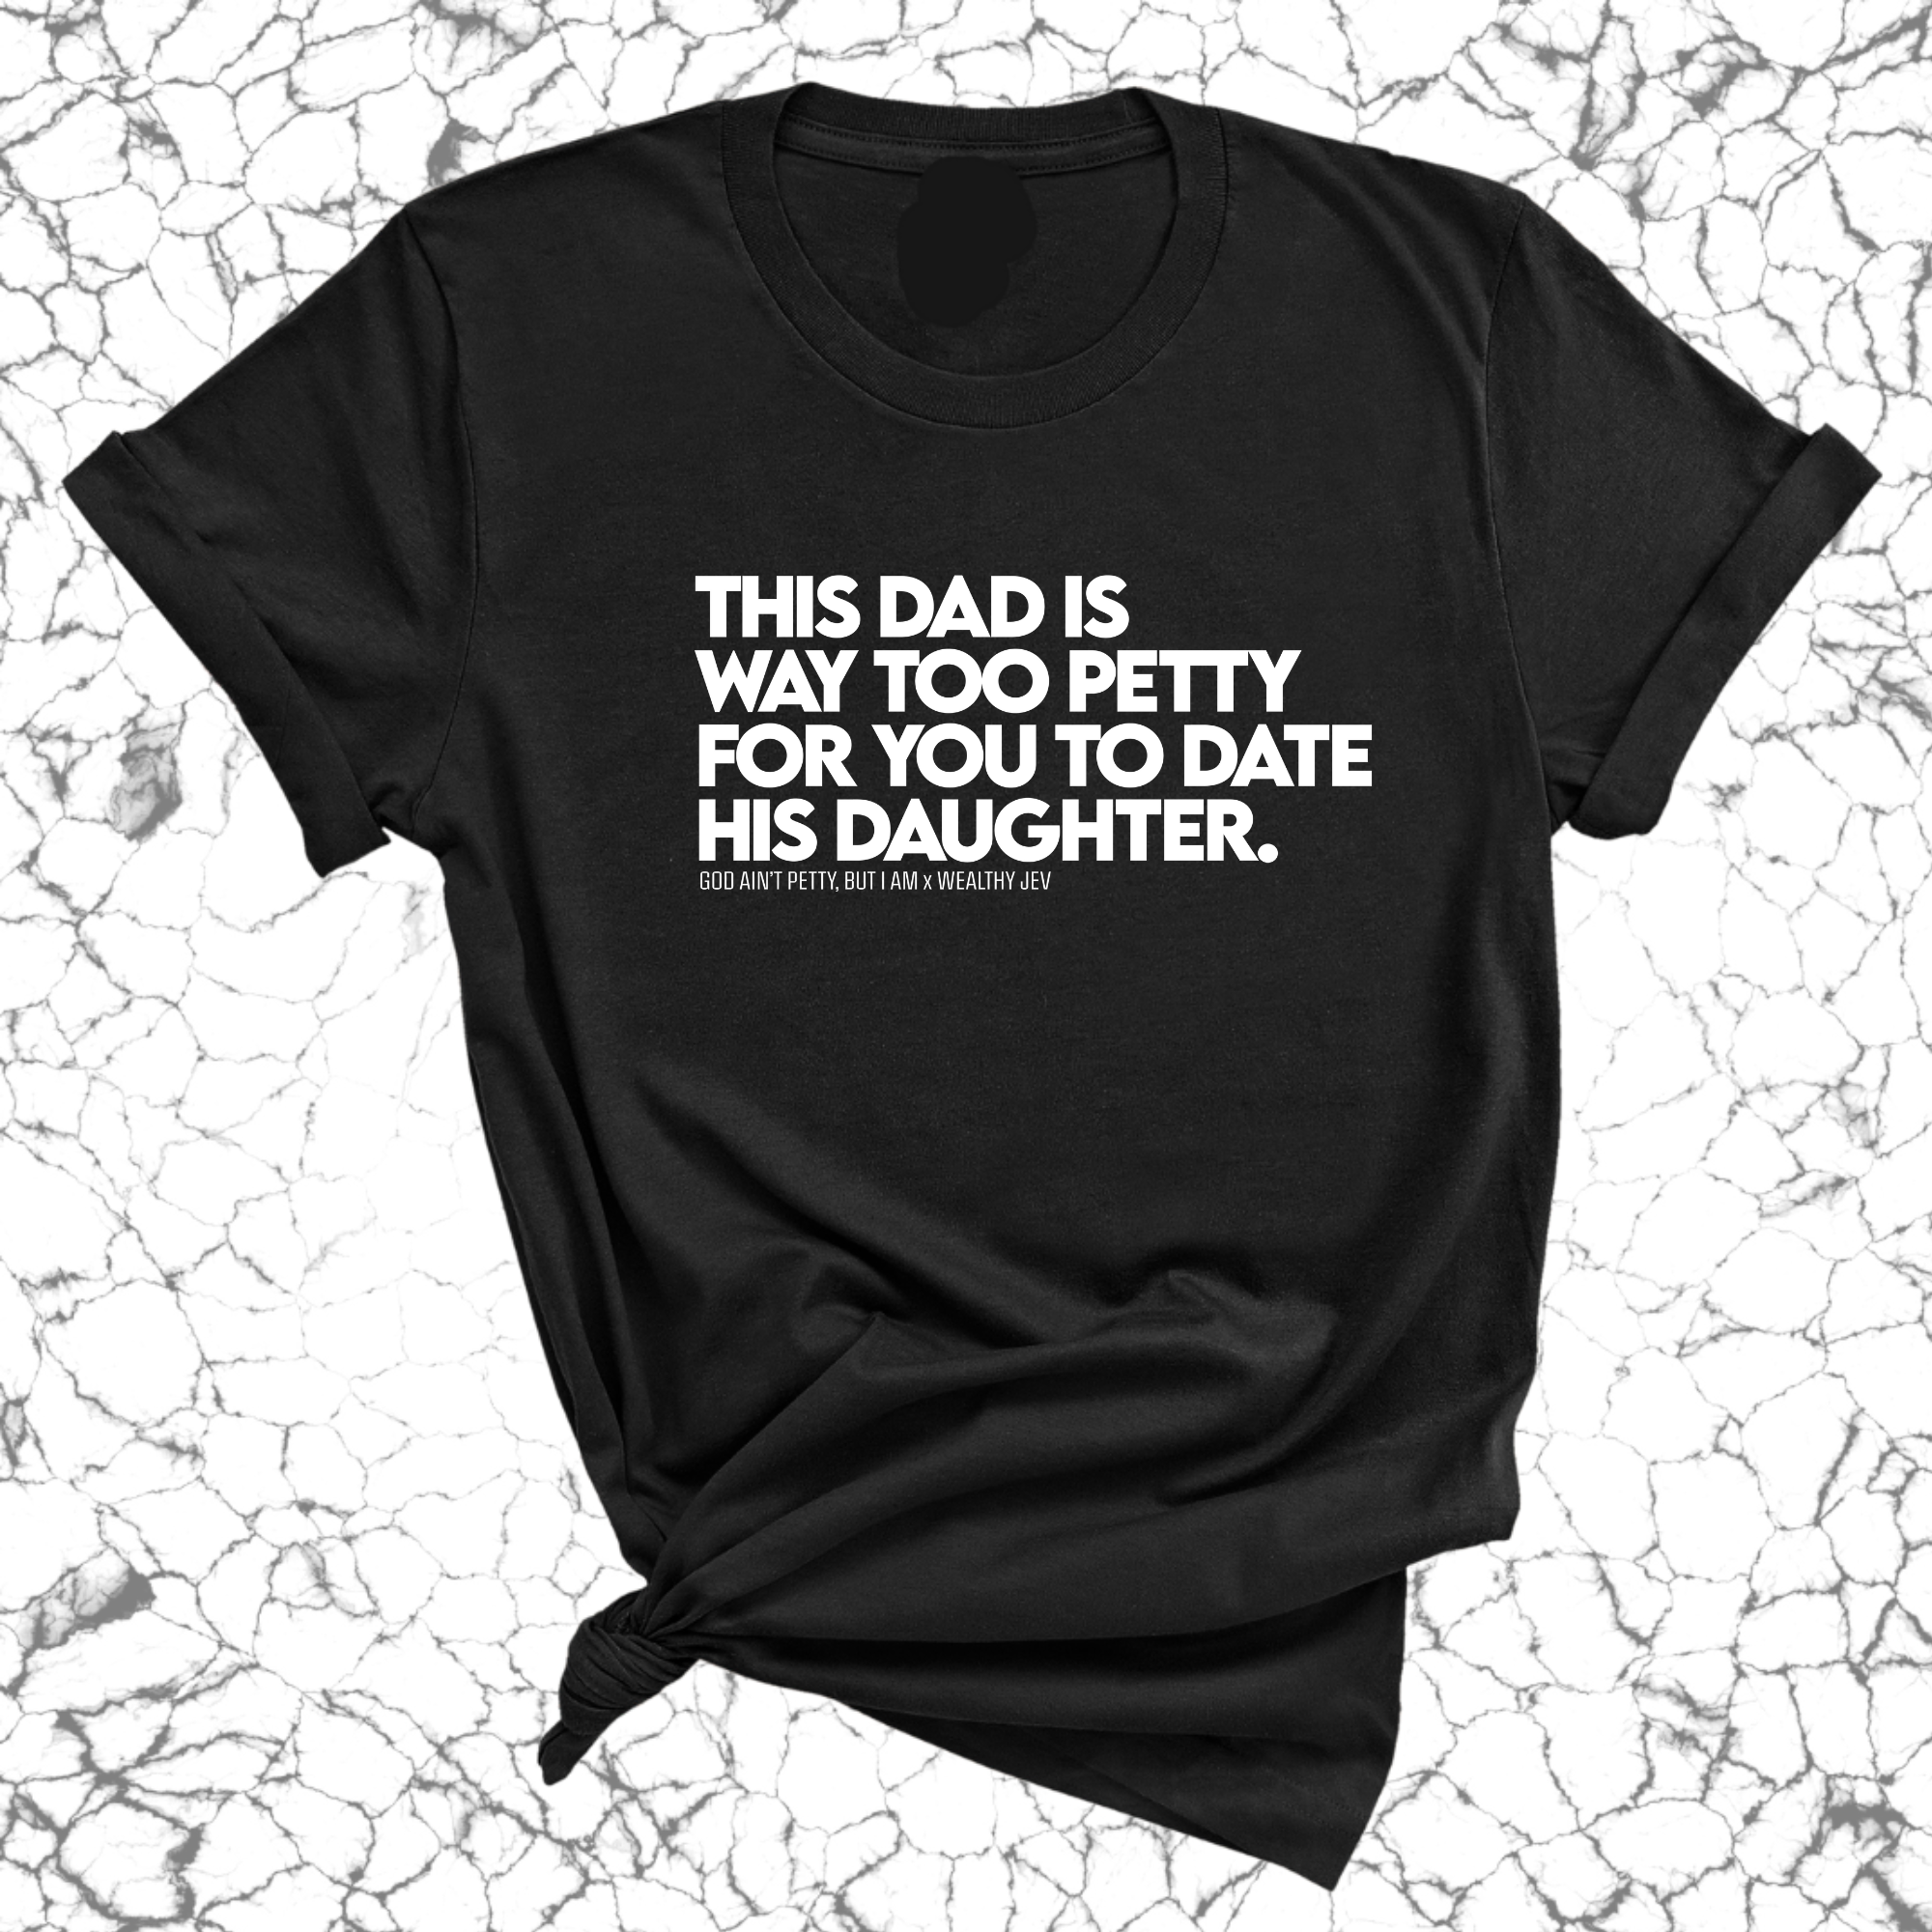 This Dad is way too petty for you to date his daughter Unisex Tee (God Ain't Petty, but I Am x Wealthy Jev Collab)-T-Shirt-The Original God Ain't Petty But I Am